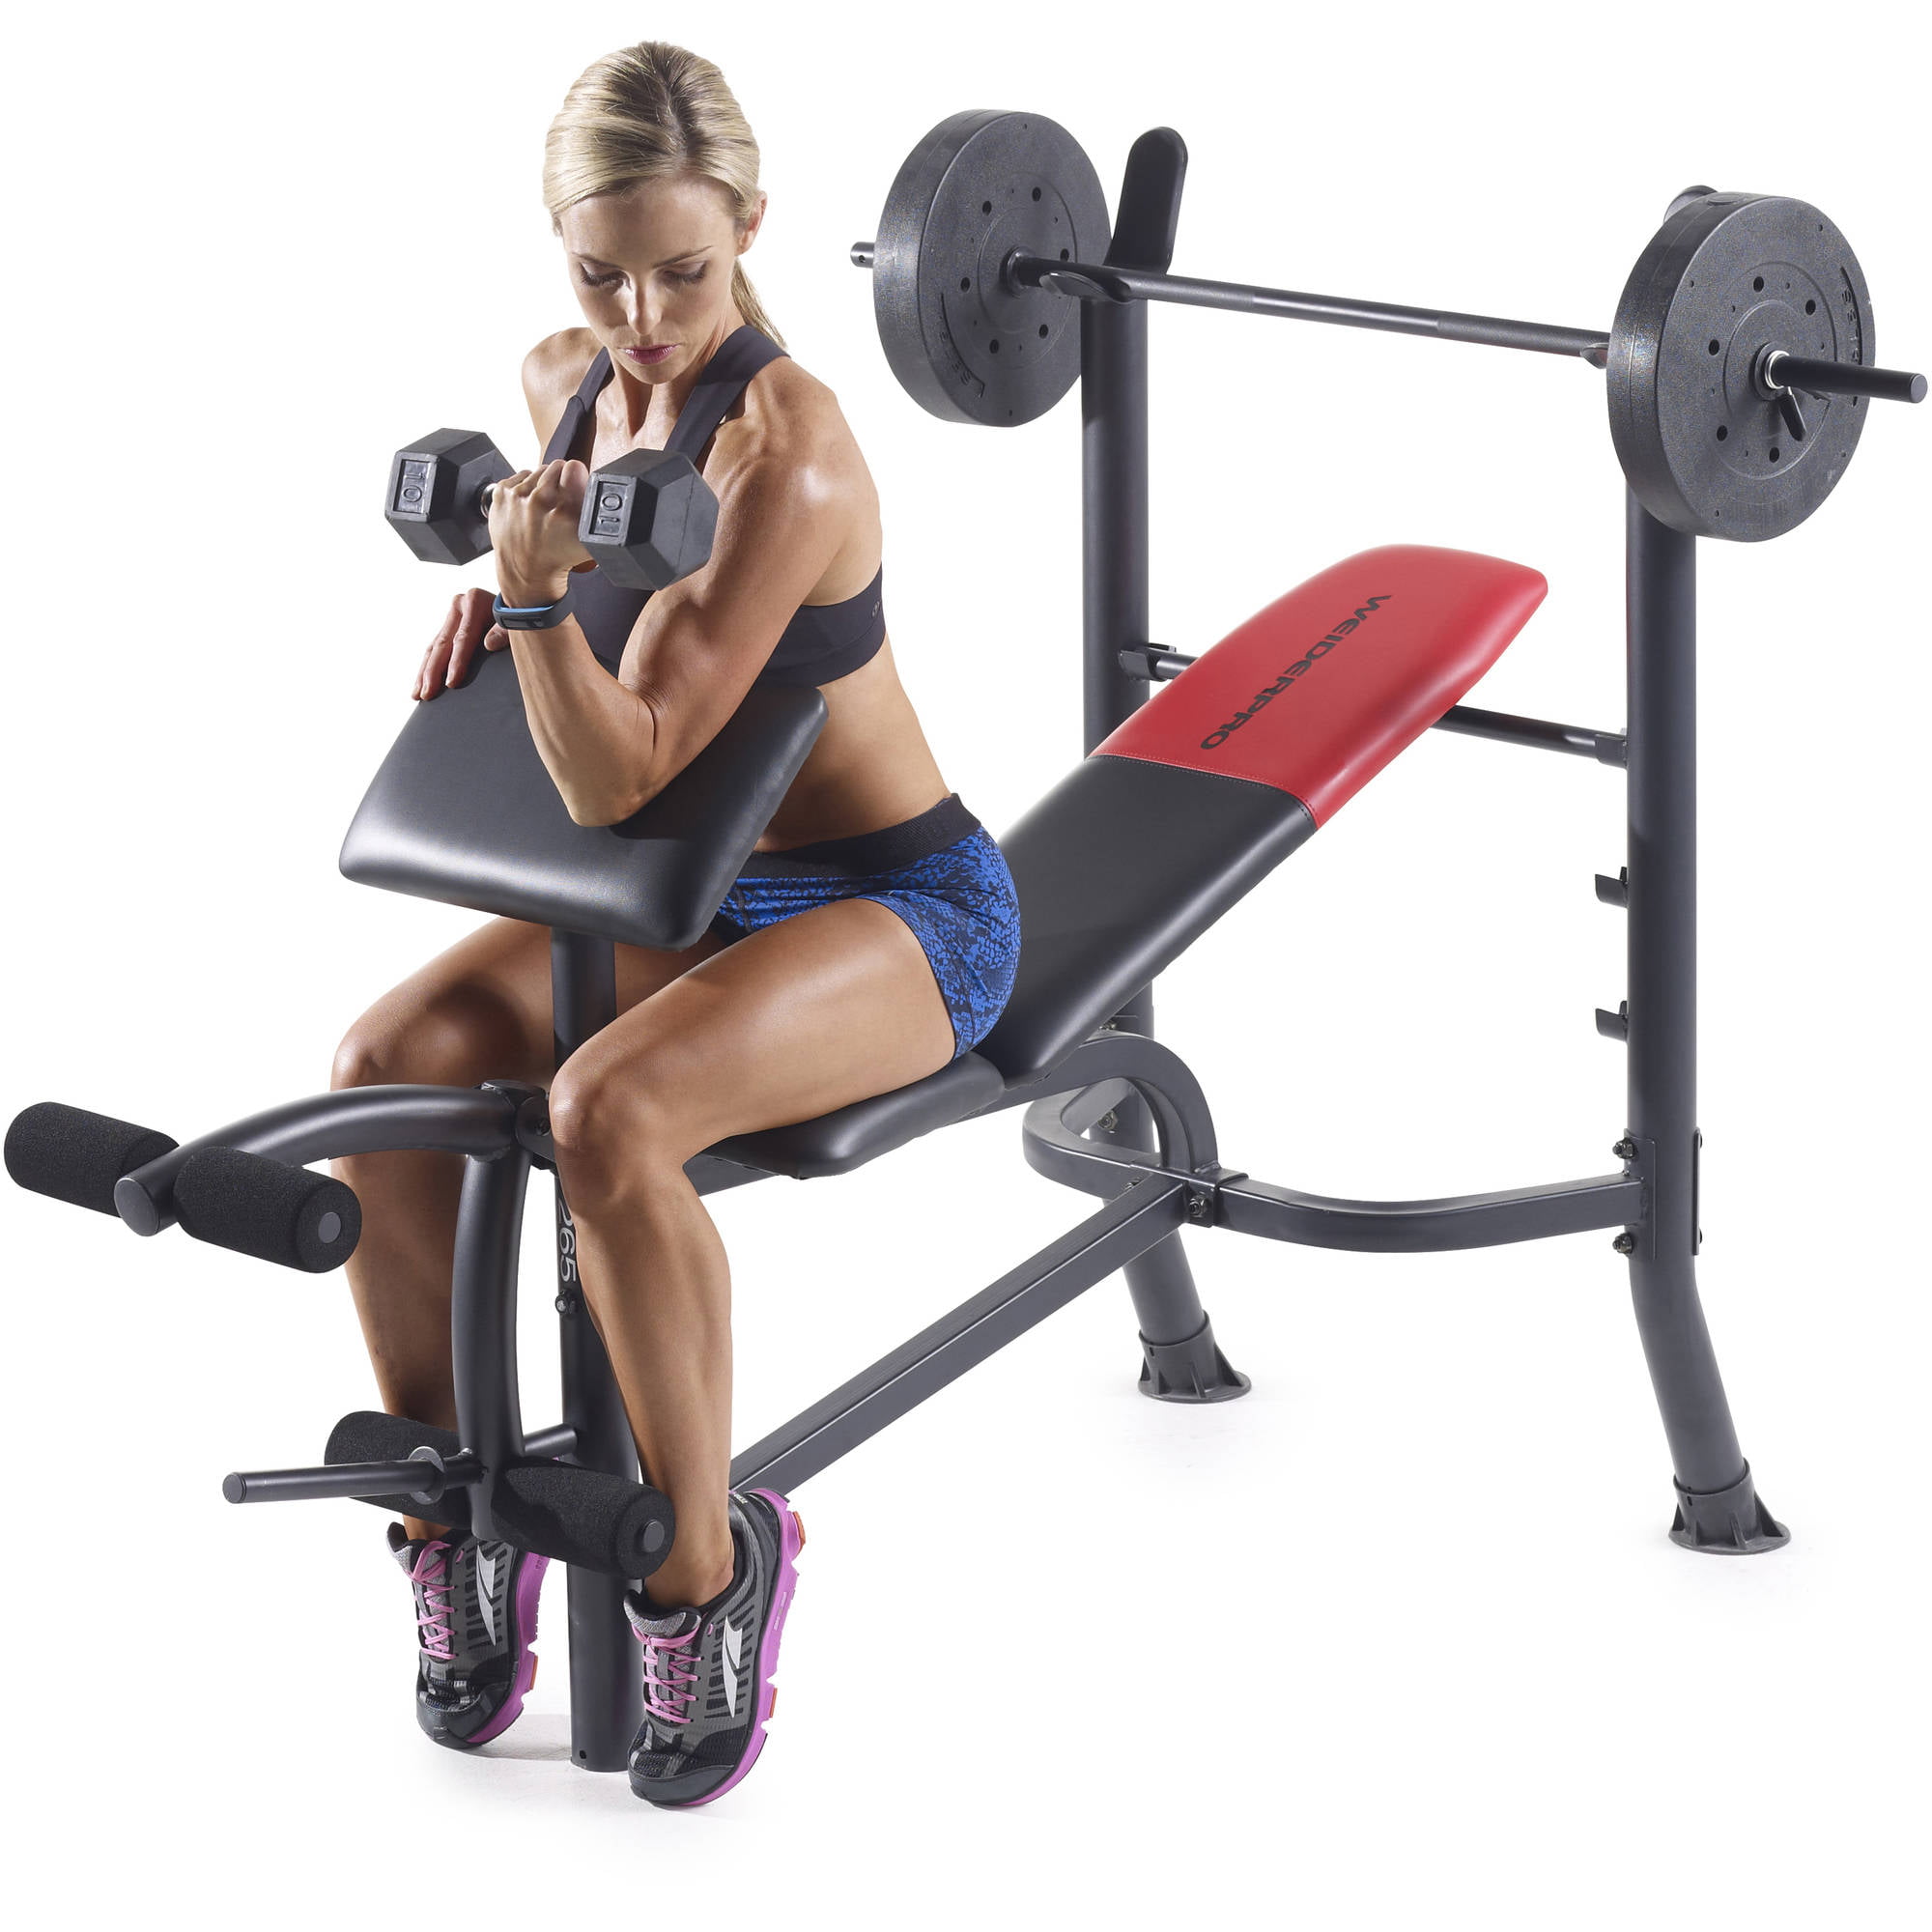 Girl riding on weight bench